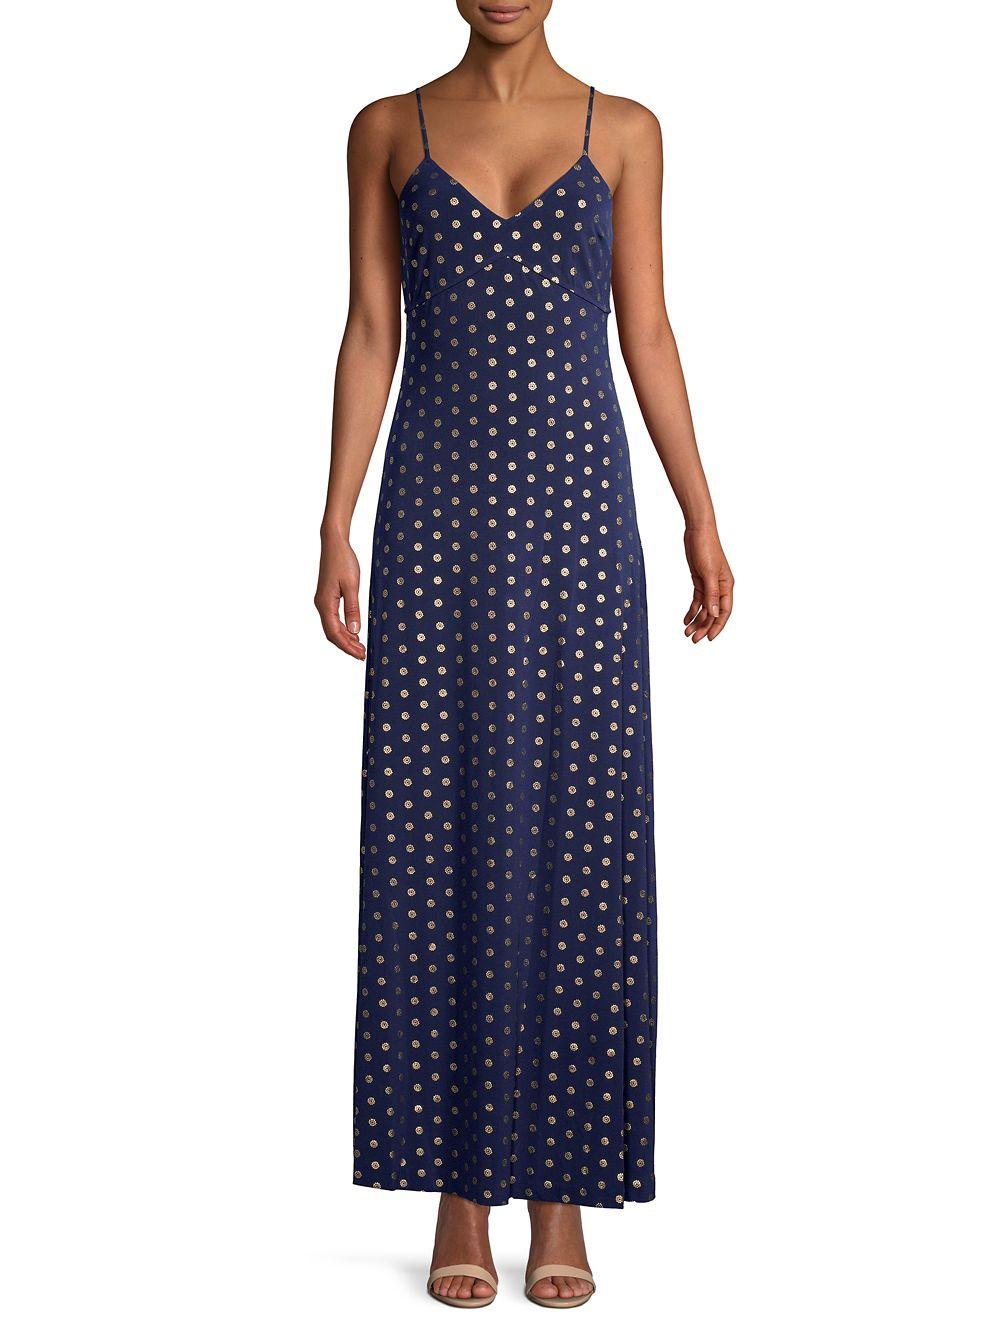 MICHAEL Michael Kors Dotted Maxi Dress in Blue - Lyst